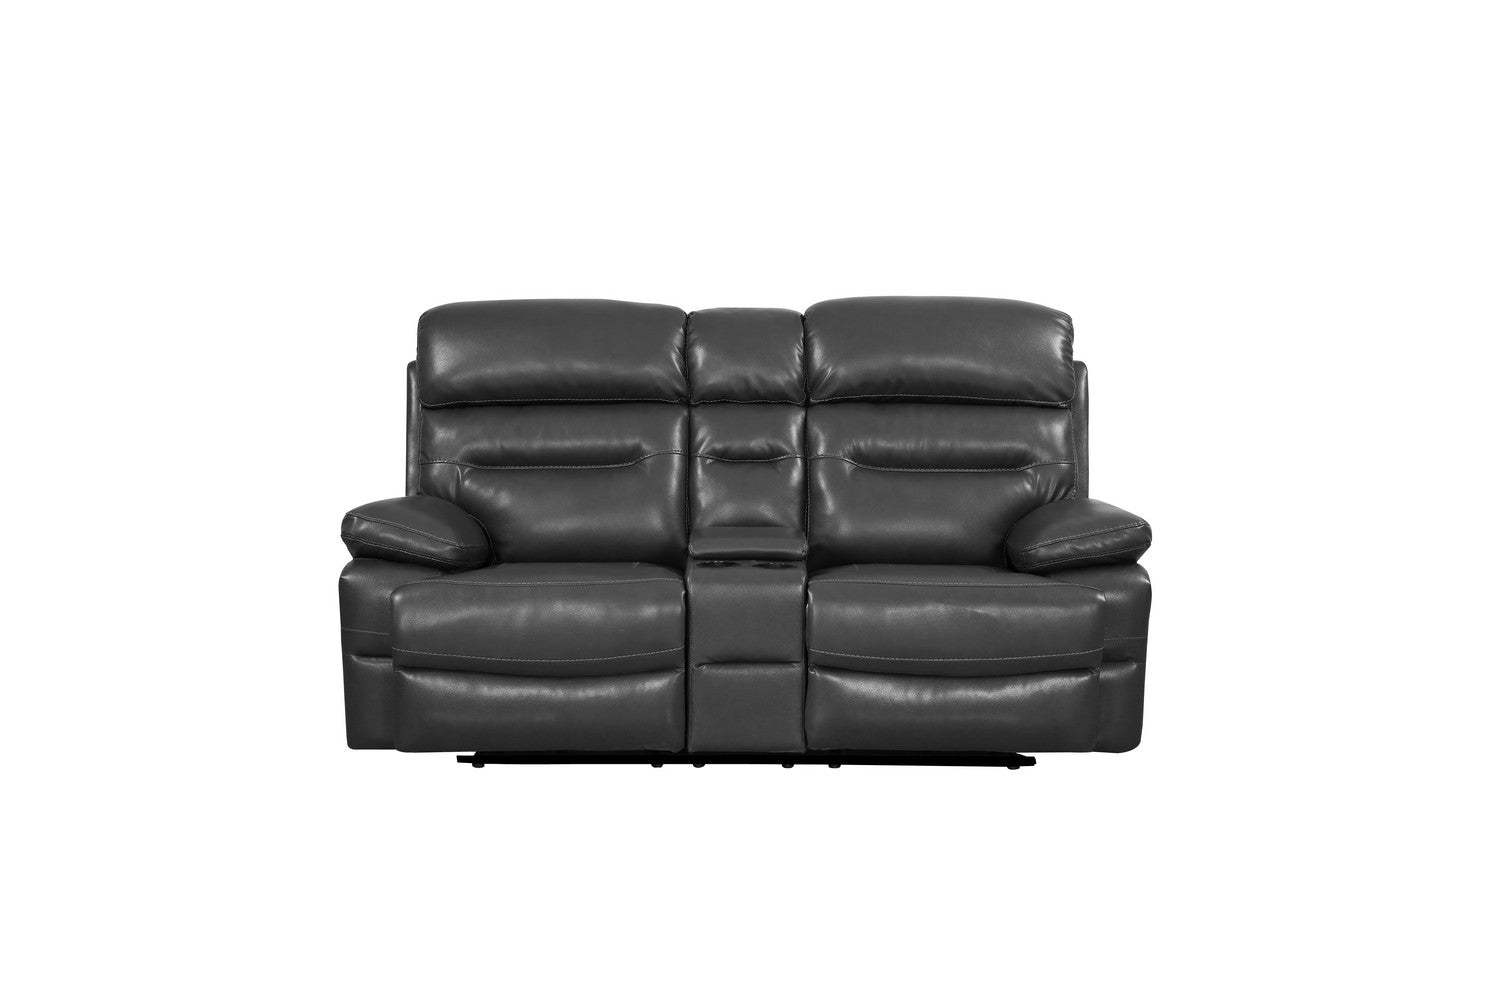 89" Gray And Black Faux Leather USB Sofa